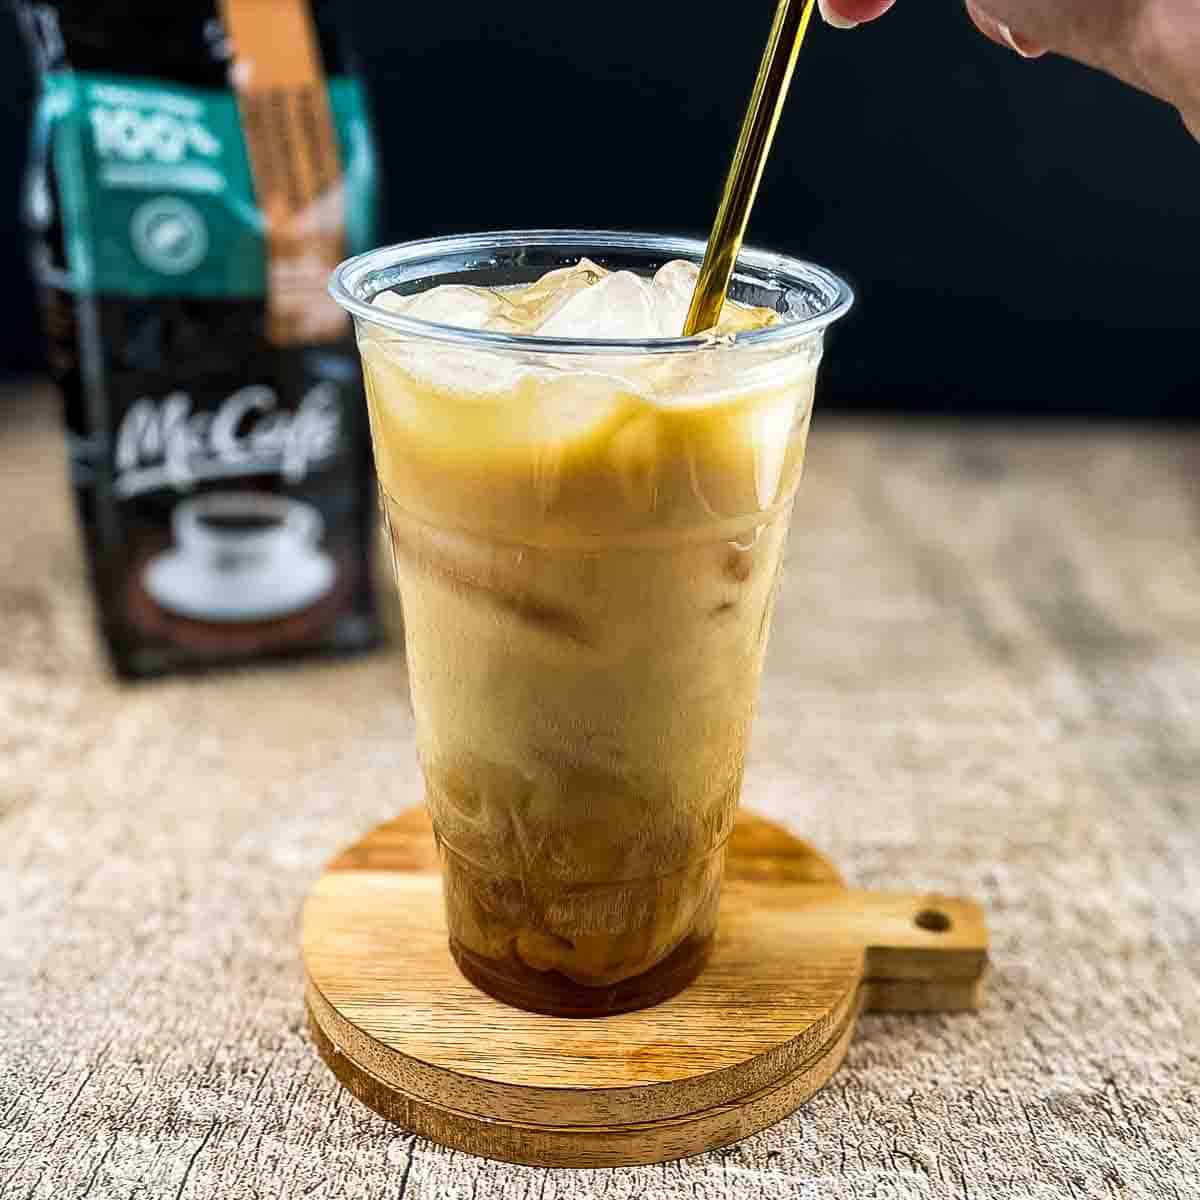 A hand using a gold straw to mix the ingredients for the McDonalds iced coffee together.